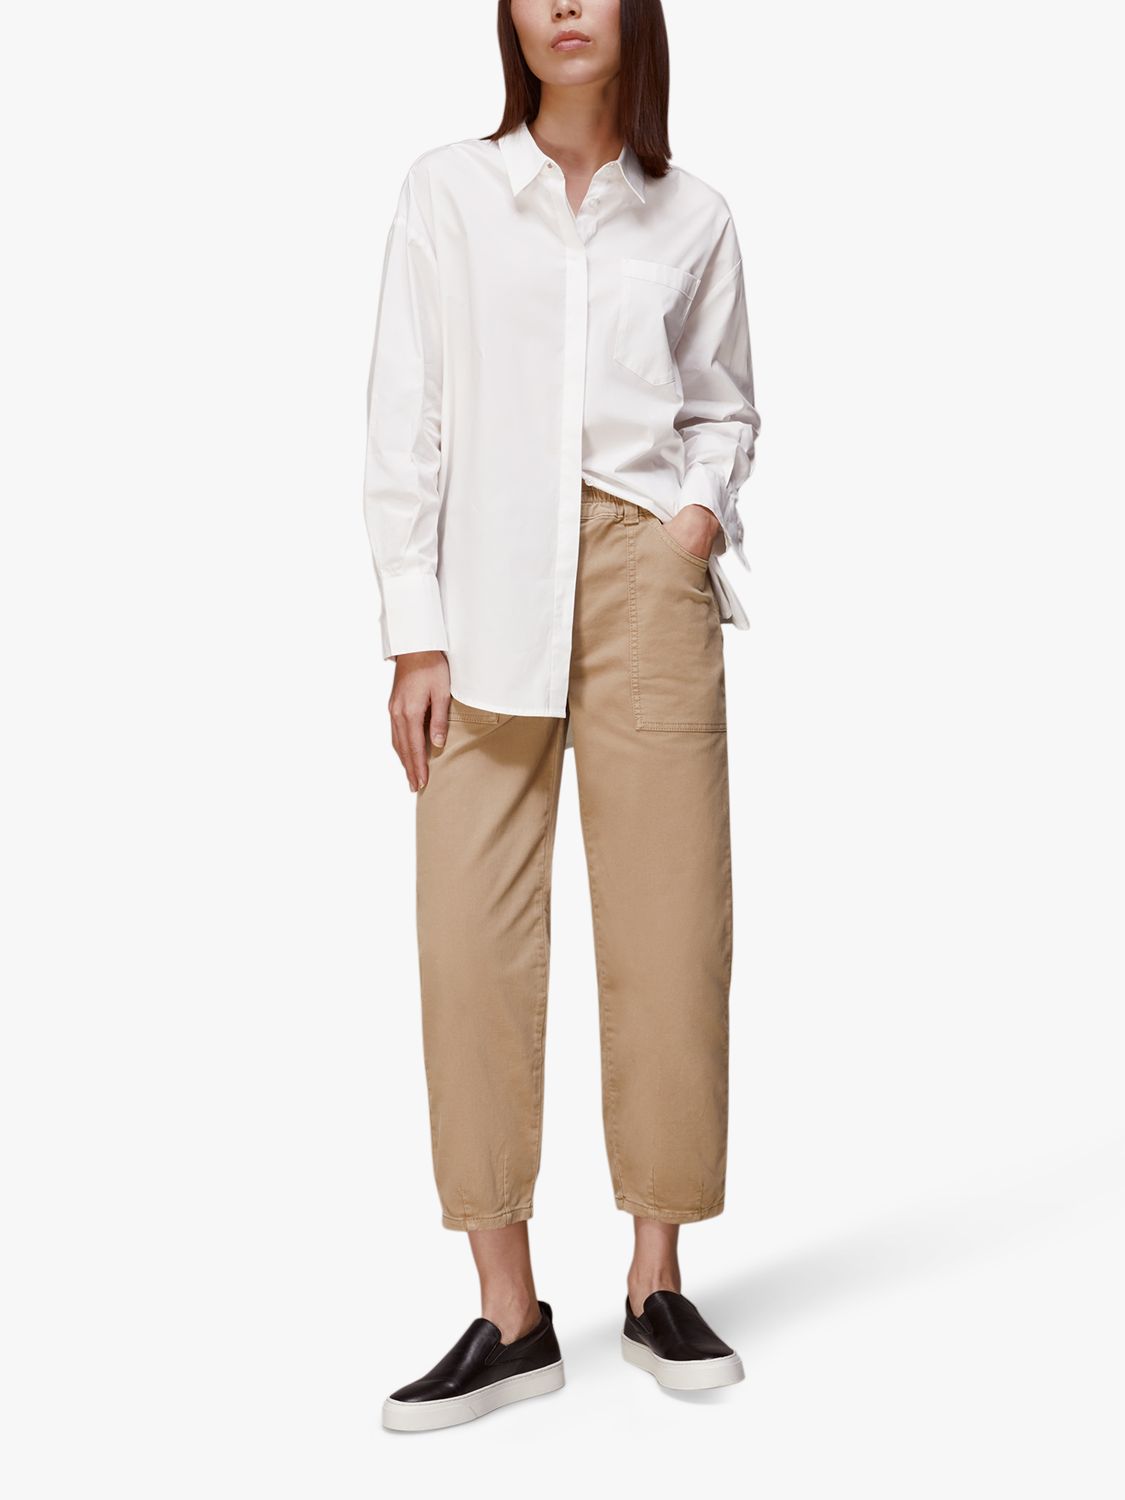 Whistles Tessa Casual Trousers, Navy, Stone at John Lewis & Partners